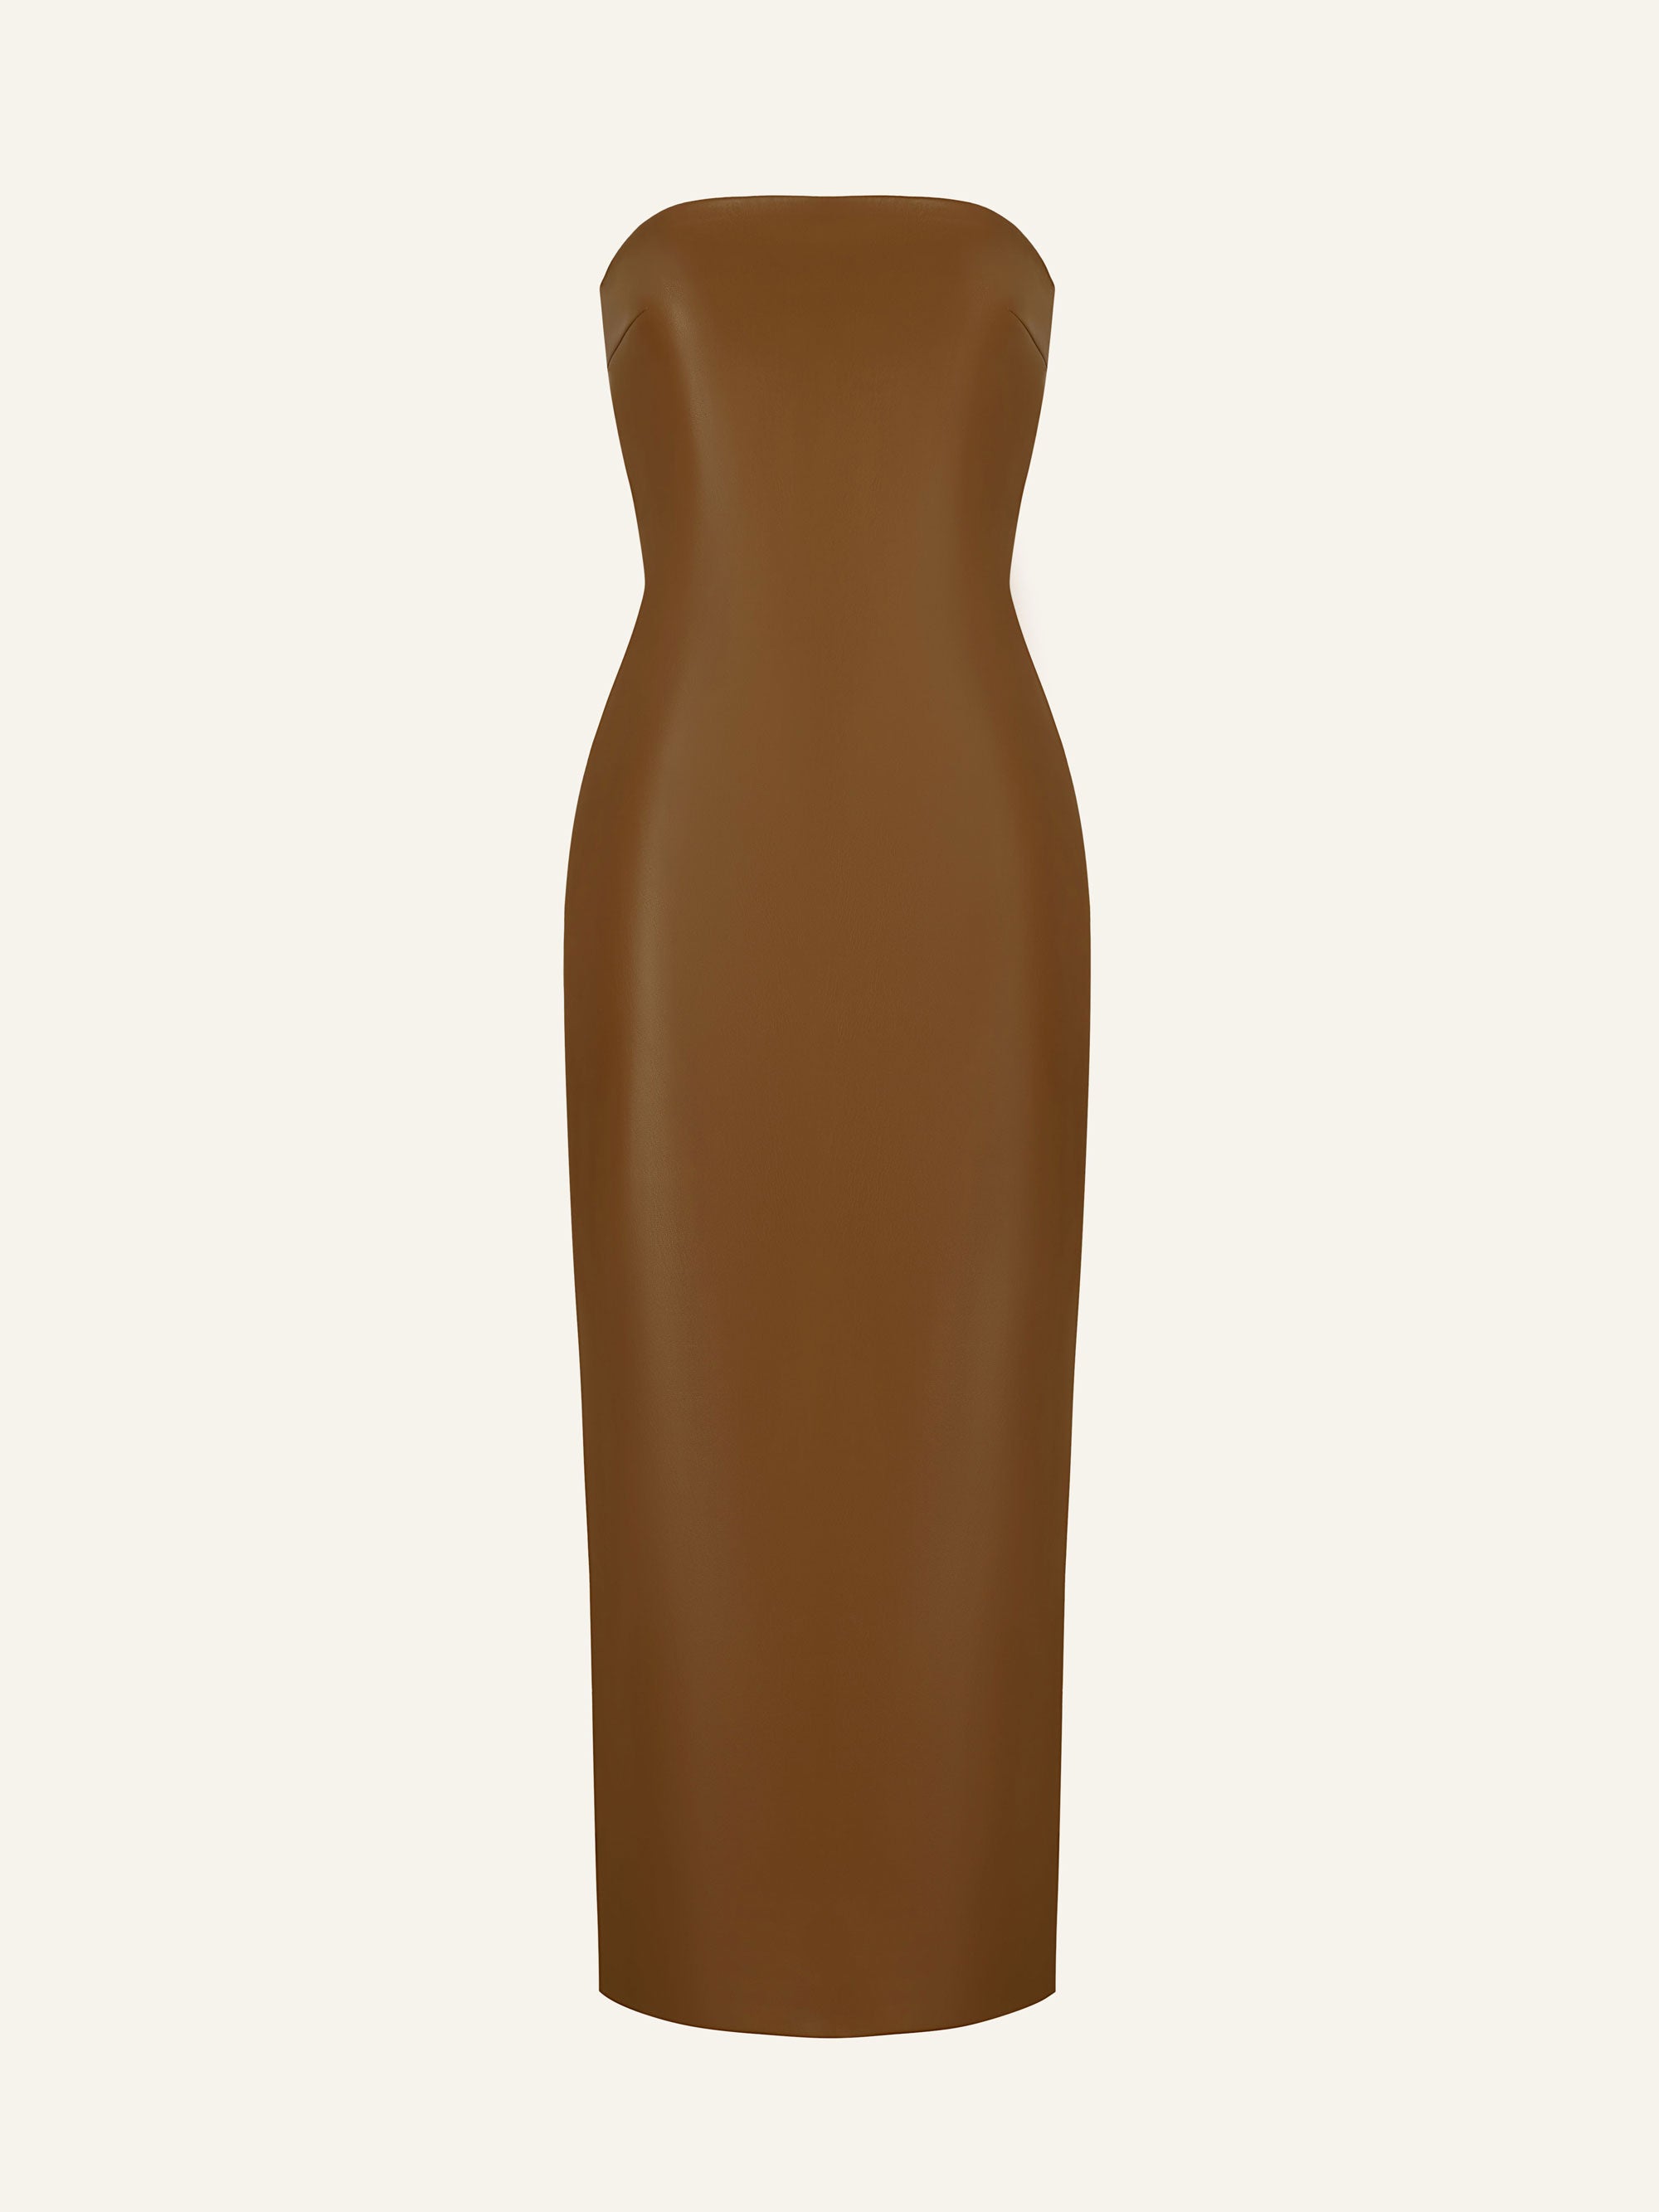 Product photo of a brown vegan leather tube dress